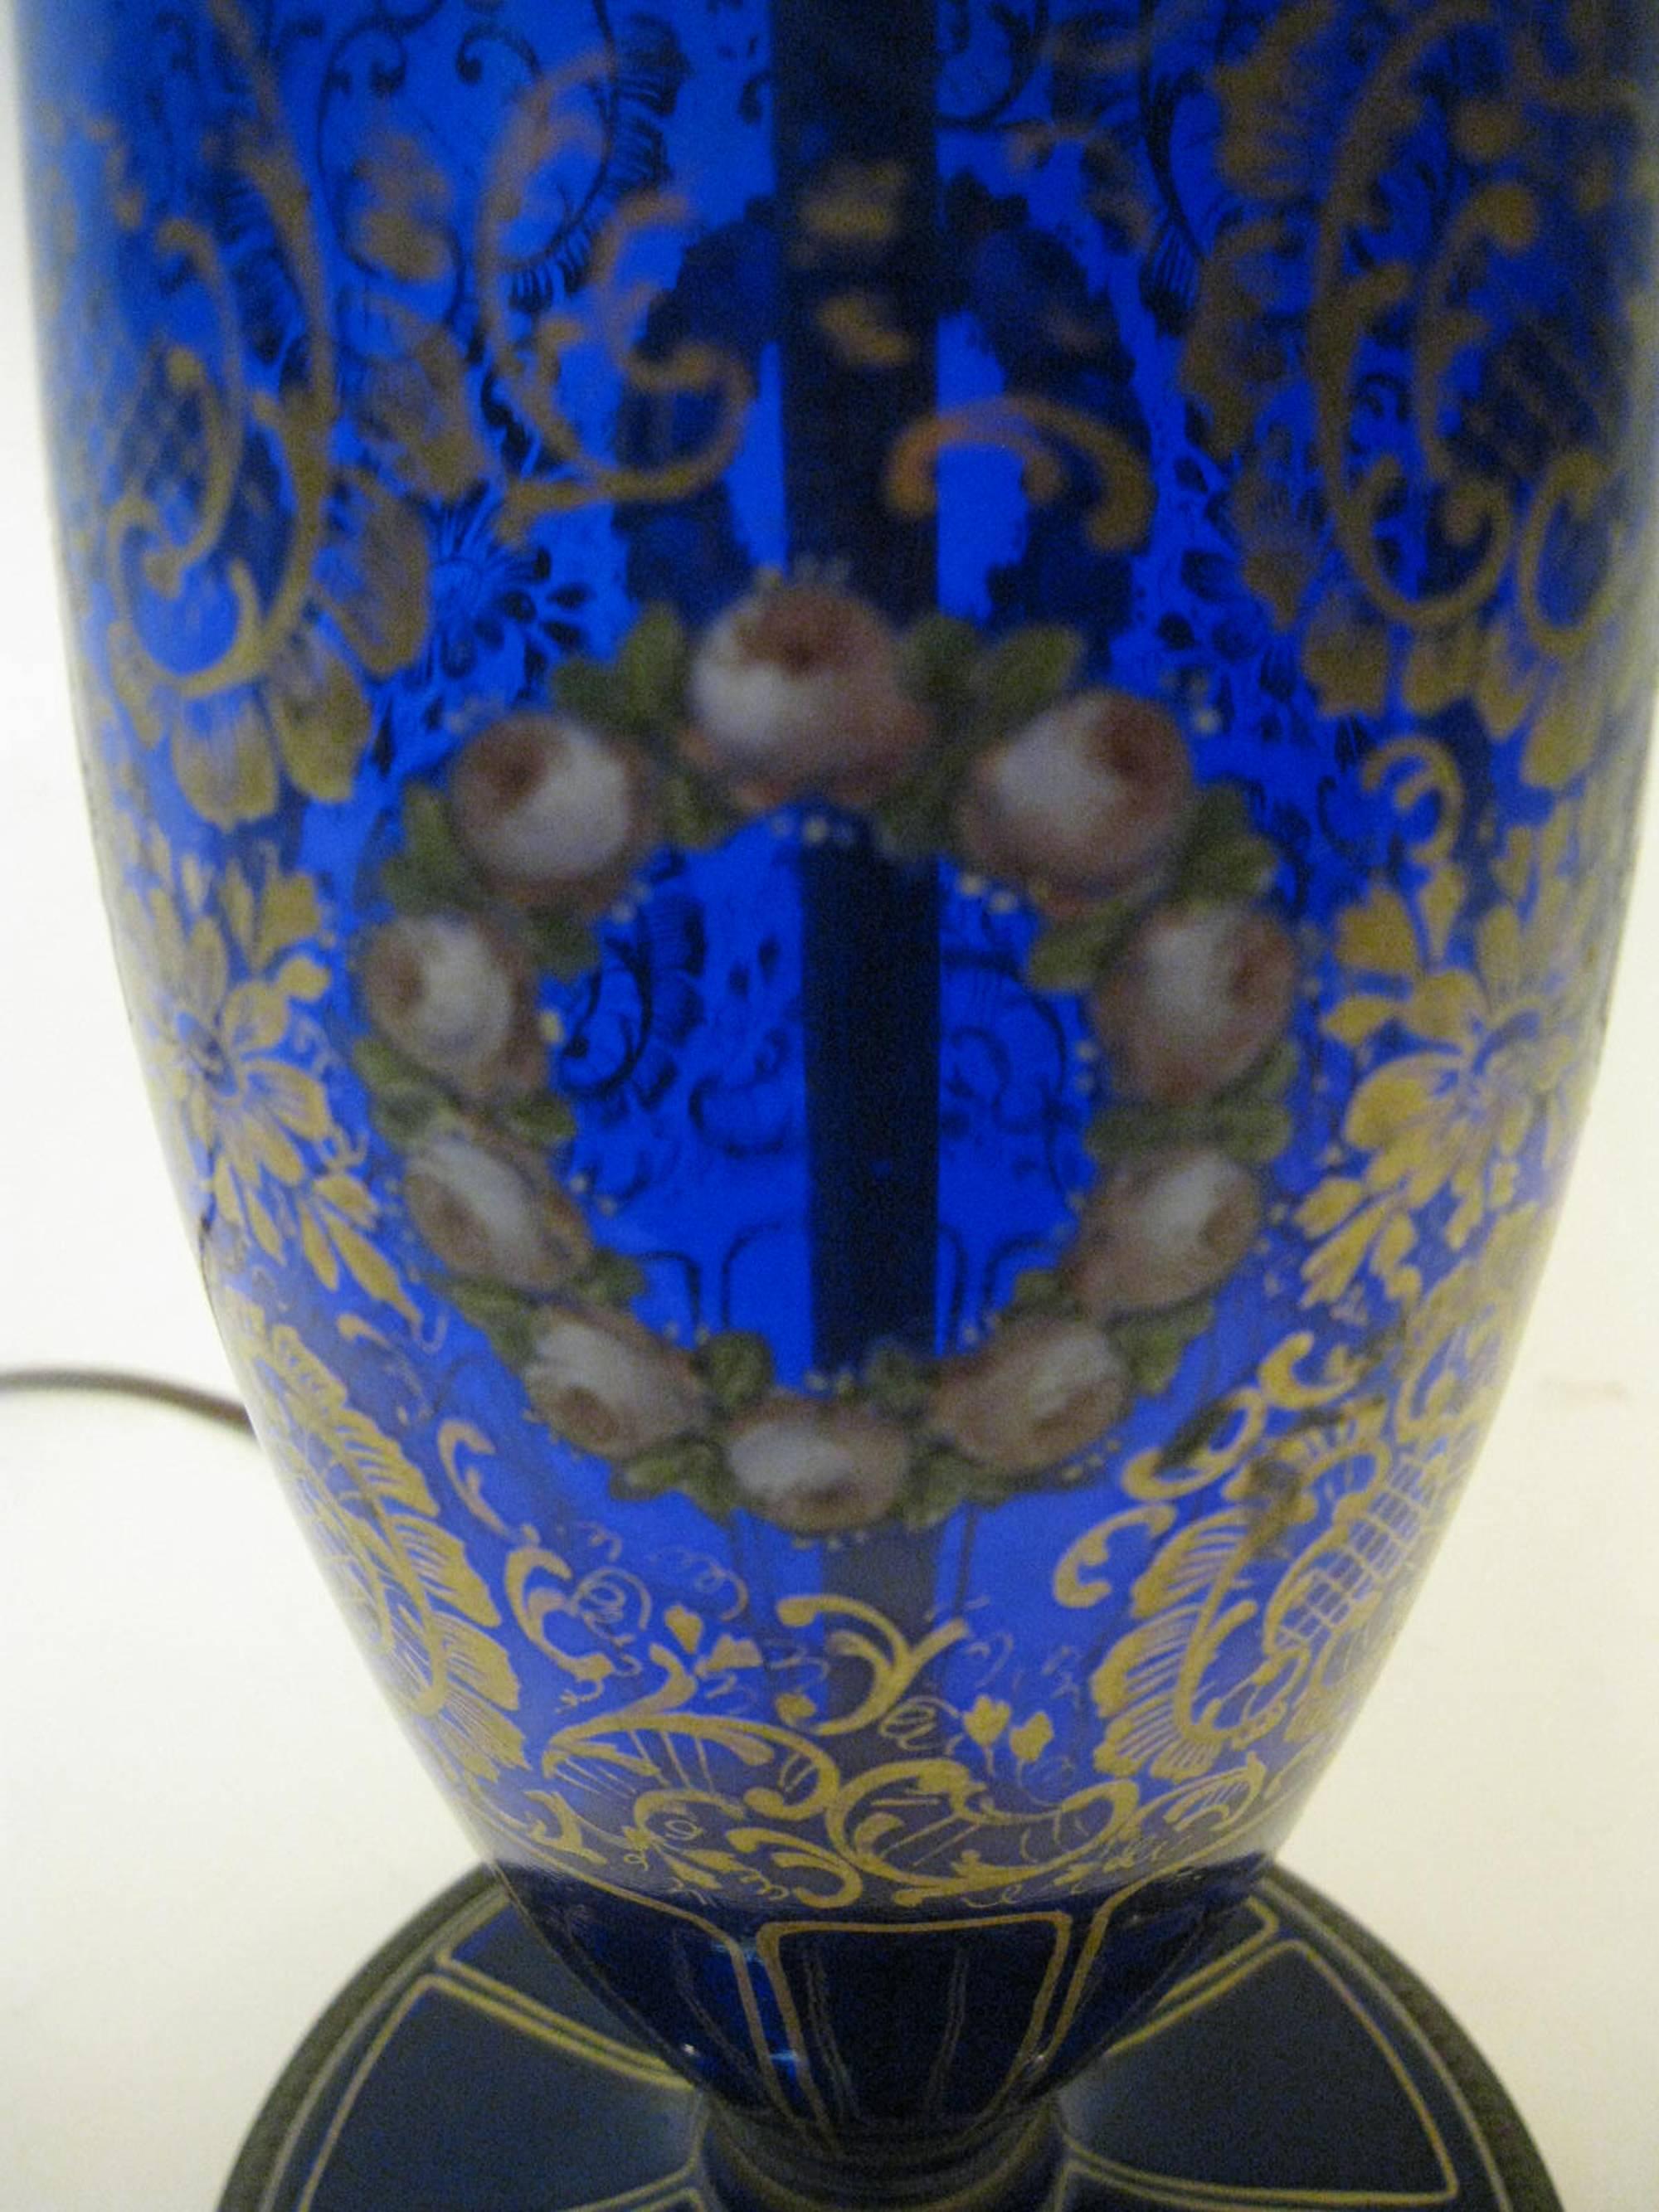 Bohemian cobalt blue Moser Art glass lamp featuring elaborate decoration with hand-painted flowers and raised white beading. The decoration is ornate and elegant and features delicate wreaths of pink rose, gold filigree and enamel dot highlights.